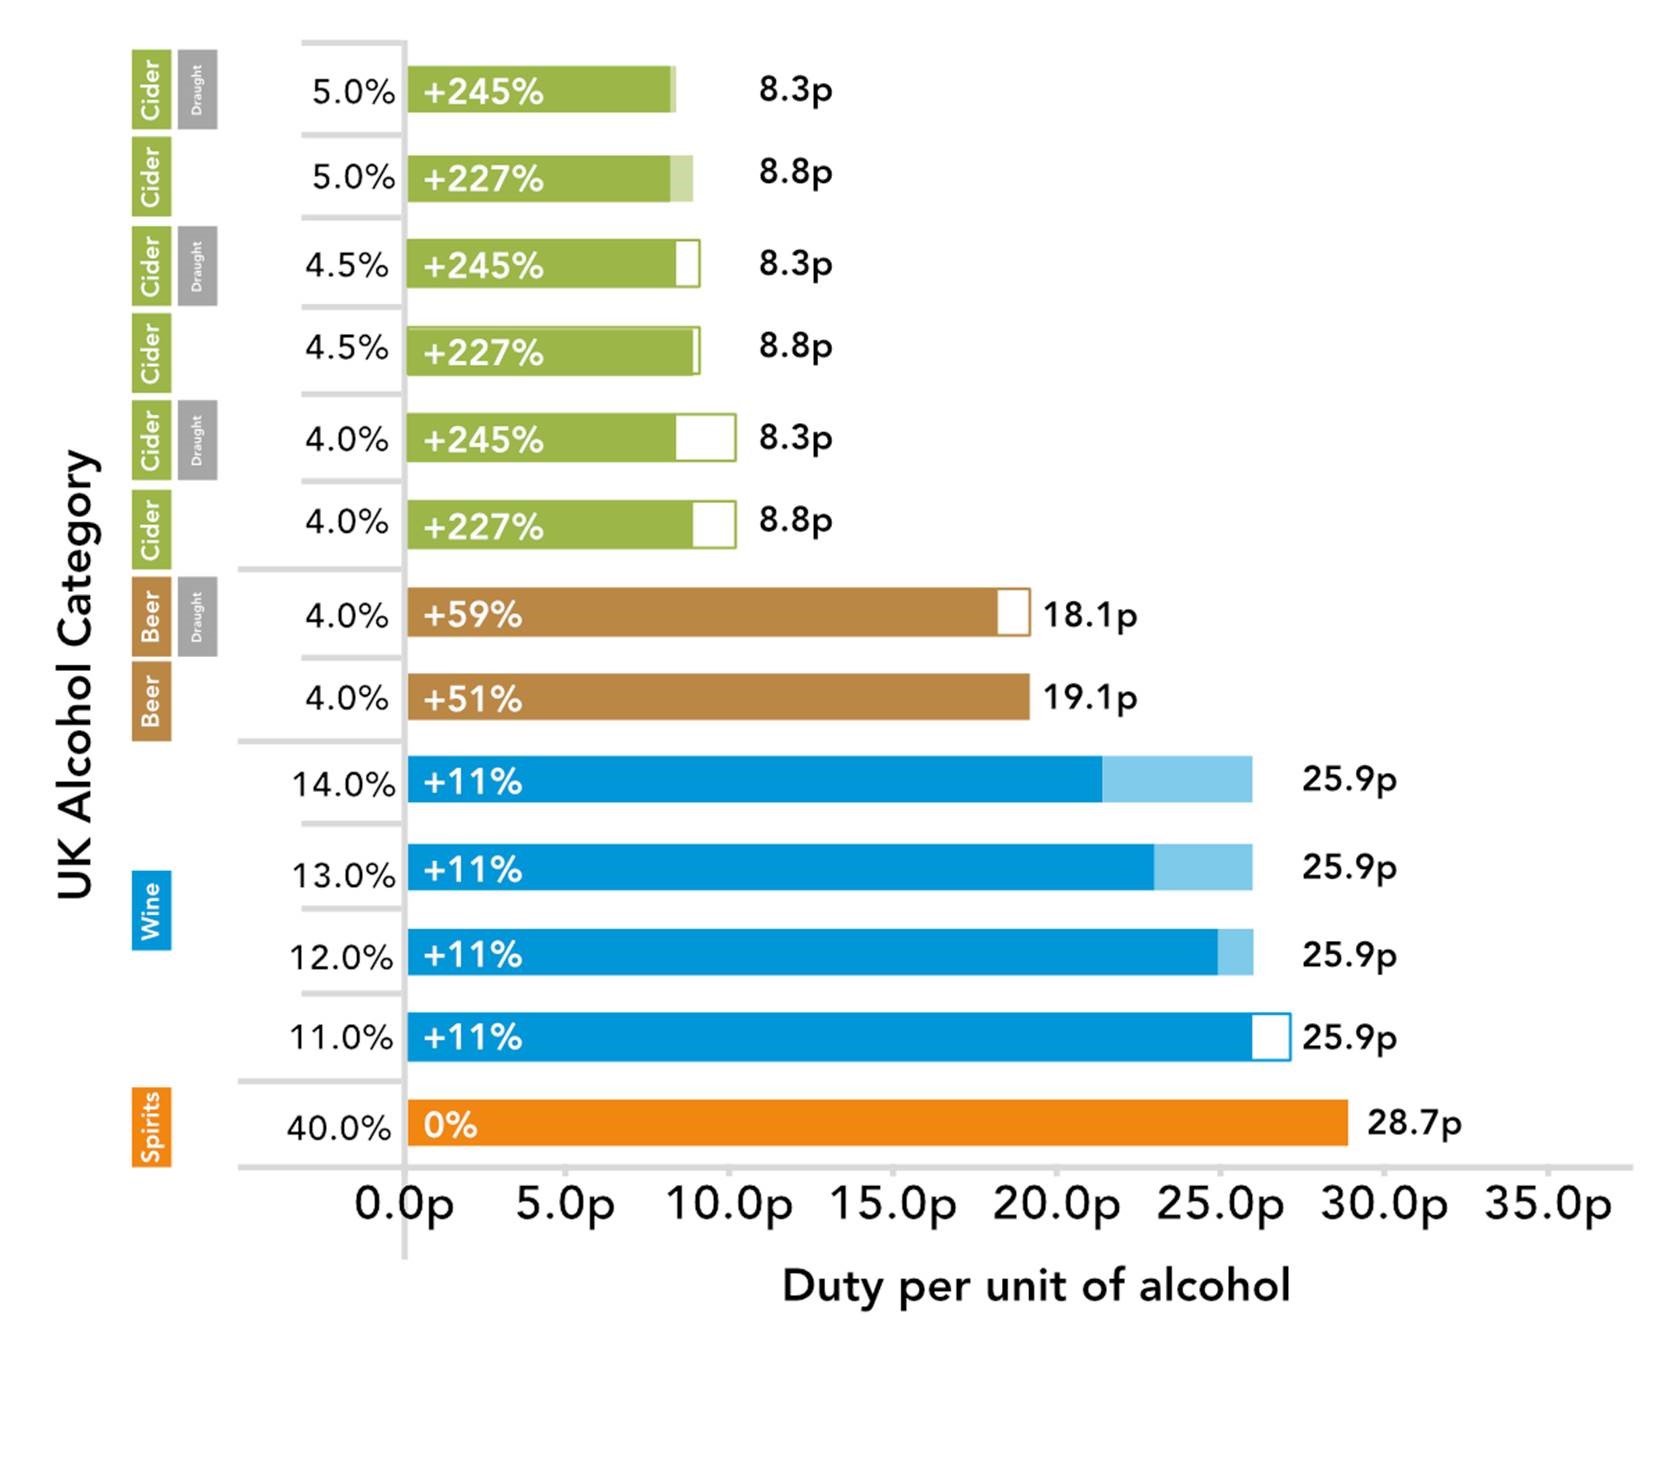 Proposed UK duty system (per unit of alcohol)